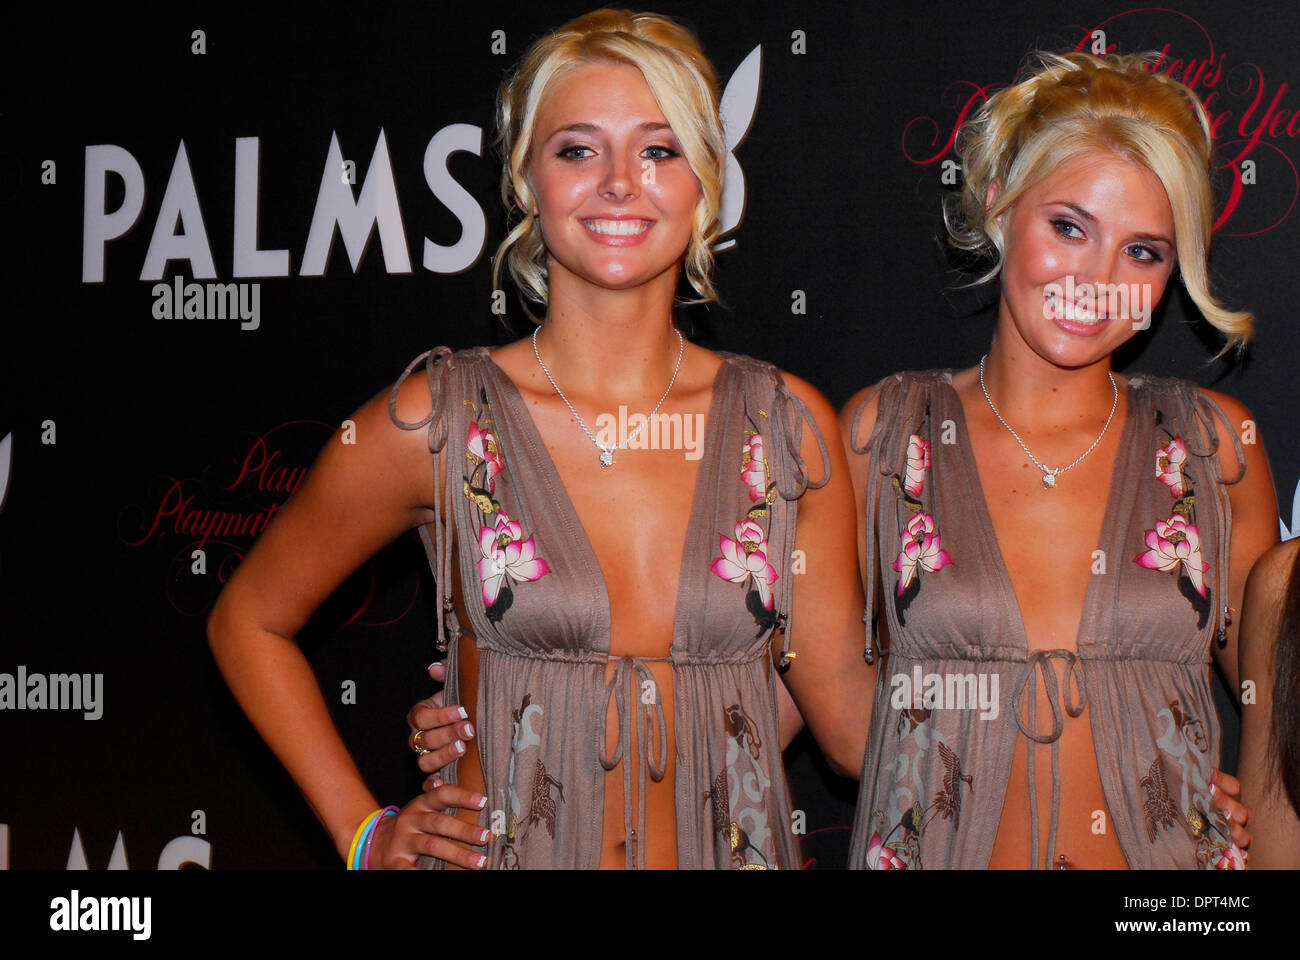 May 02, 2009 - Las Vegas, Nevada, USA - (L-R) Twins KARISSA SHANNON and KRISTINA SHANNON at the Playboy Playmate of the Year 2009 party at the Palms Casino in Las Vegas. (Credit Image: © C E Mitchell/ZUMA Press) Stock Photo